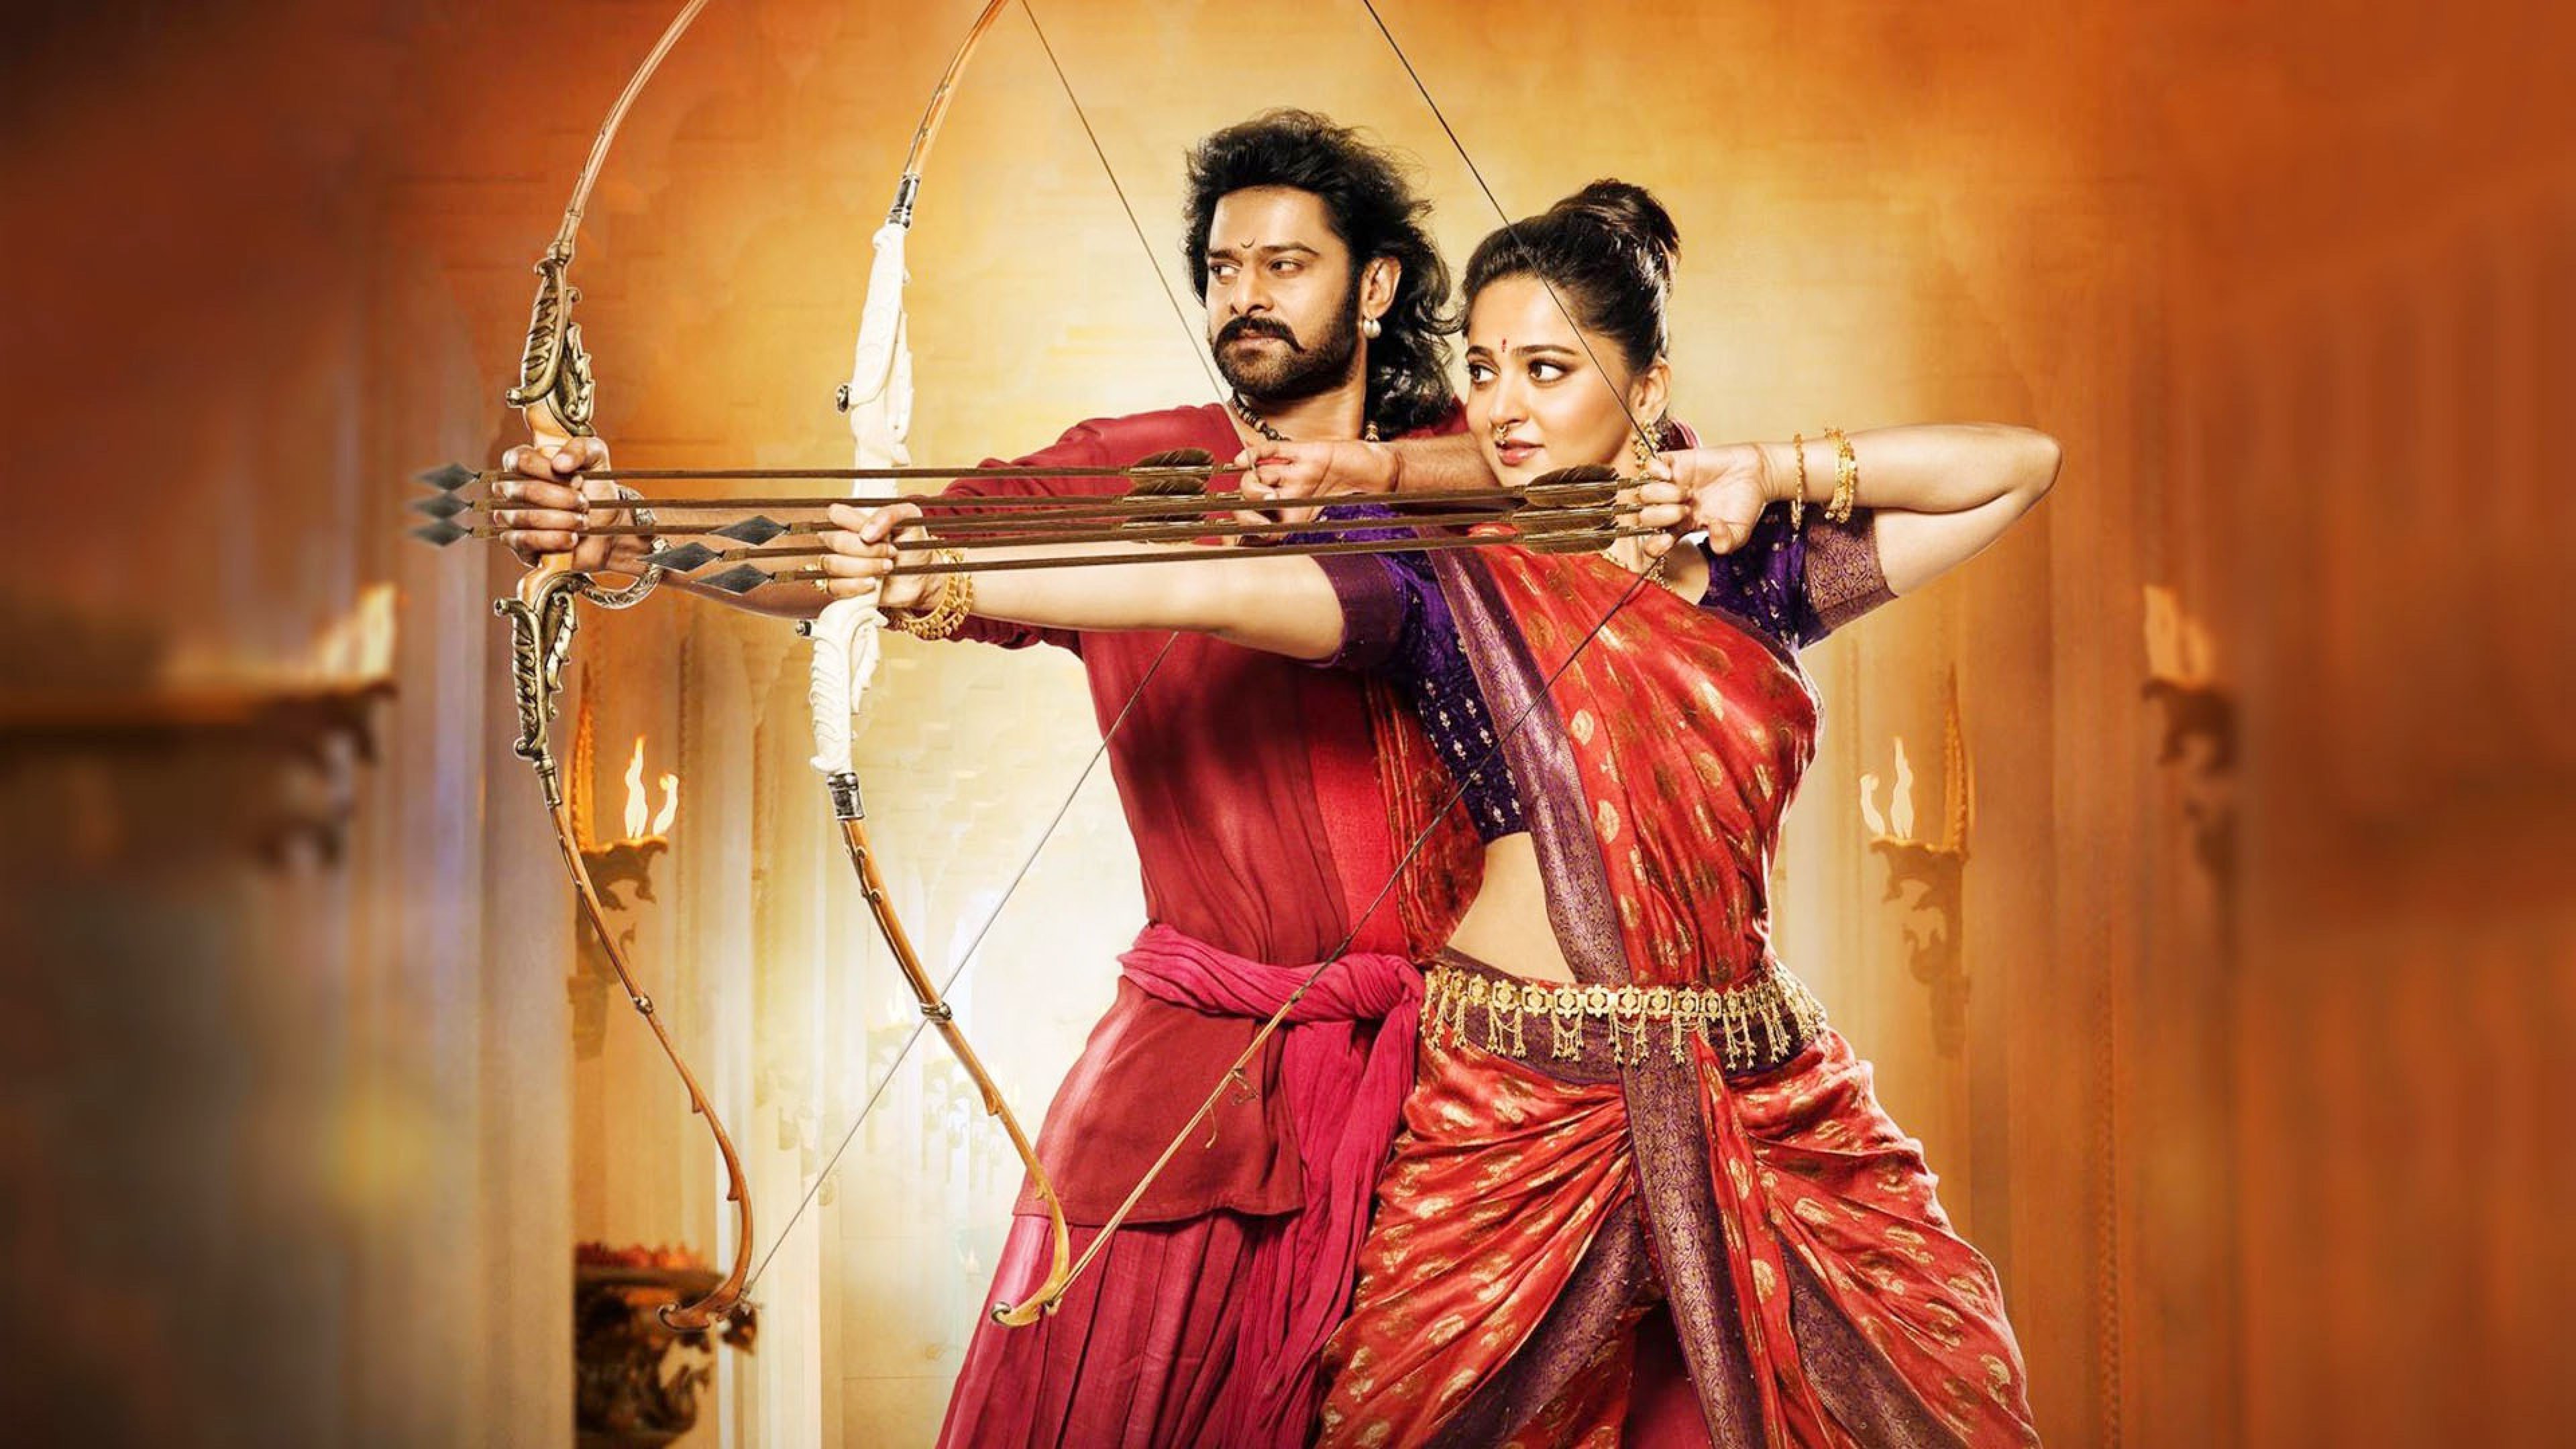 Baahubali The Conclusion Prabhas and Anushka Shetty movie 2017 -   • 4K 5k 8k HD Desktop Wallpapers for Ultra High  Definition Widescreen Desktop, Tablet & Smartphone wallpapers